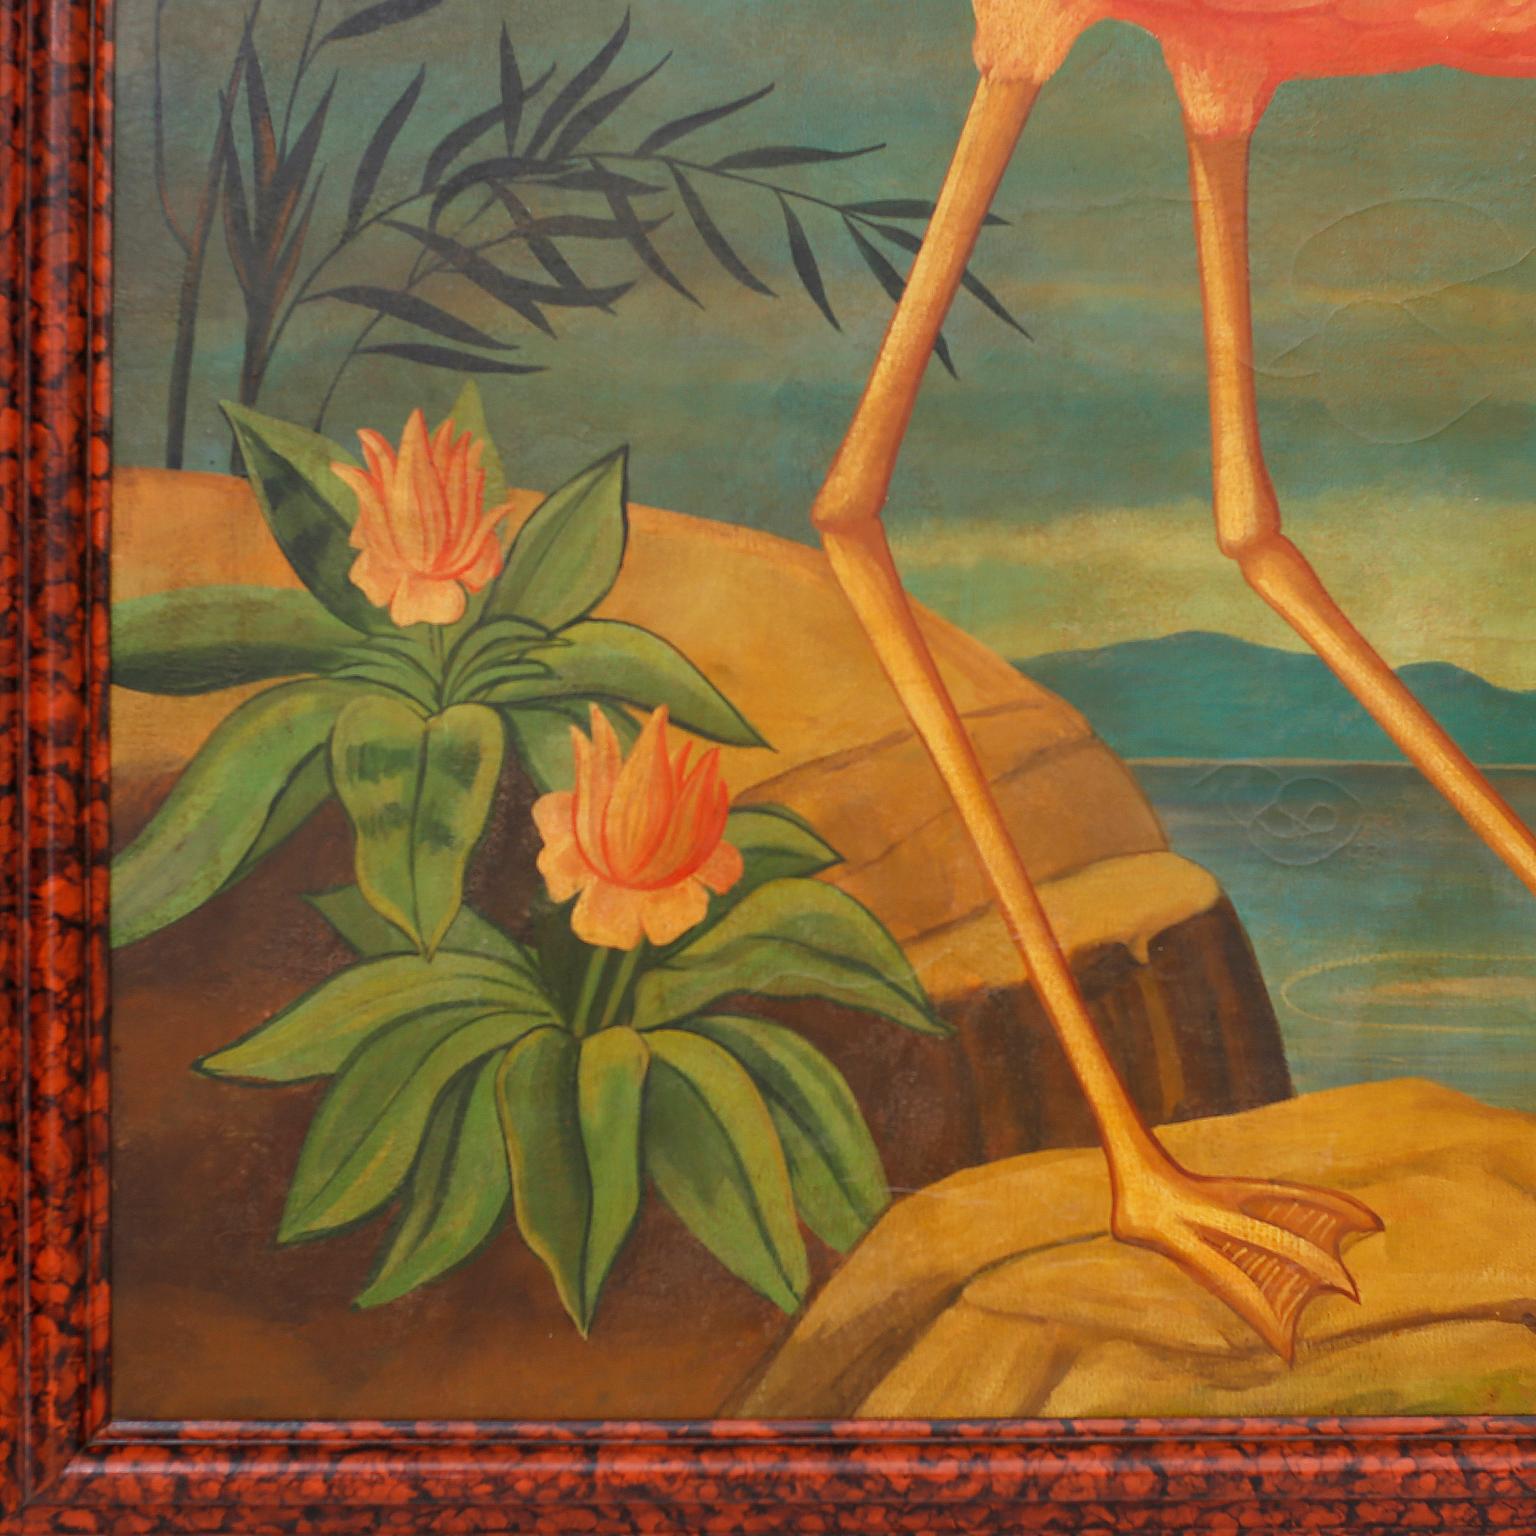 Large Oil Painting on Canvas of a Flamingo by William Skilling 1